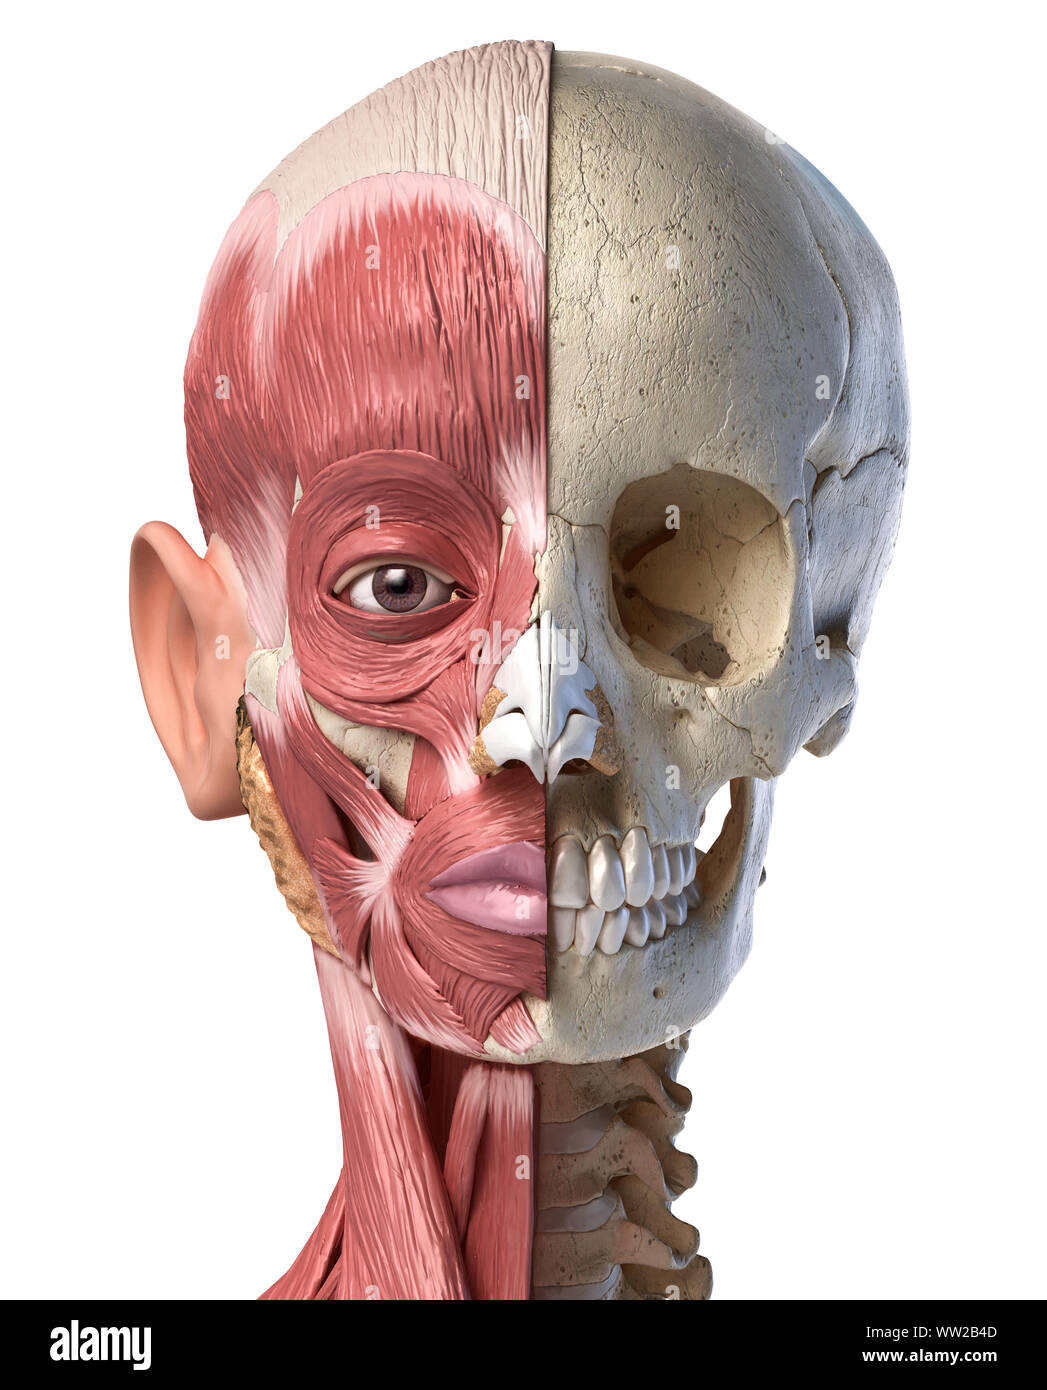 Human anatomy 3d illustration of the head muscles on left side and